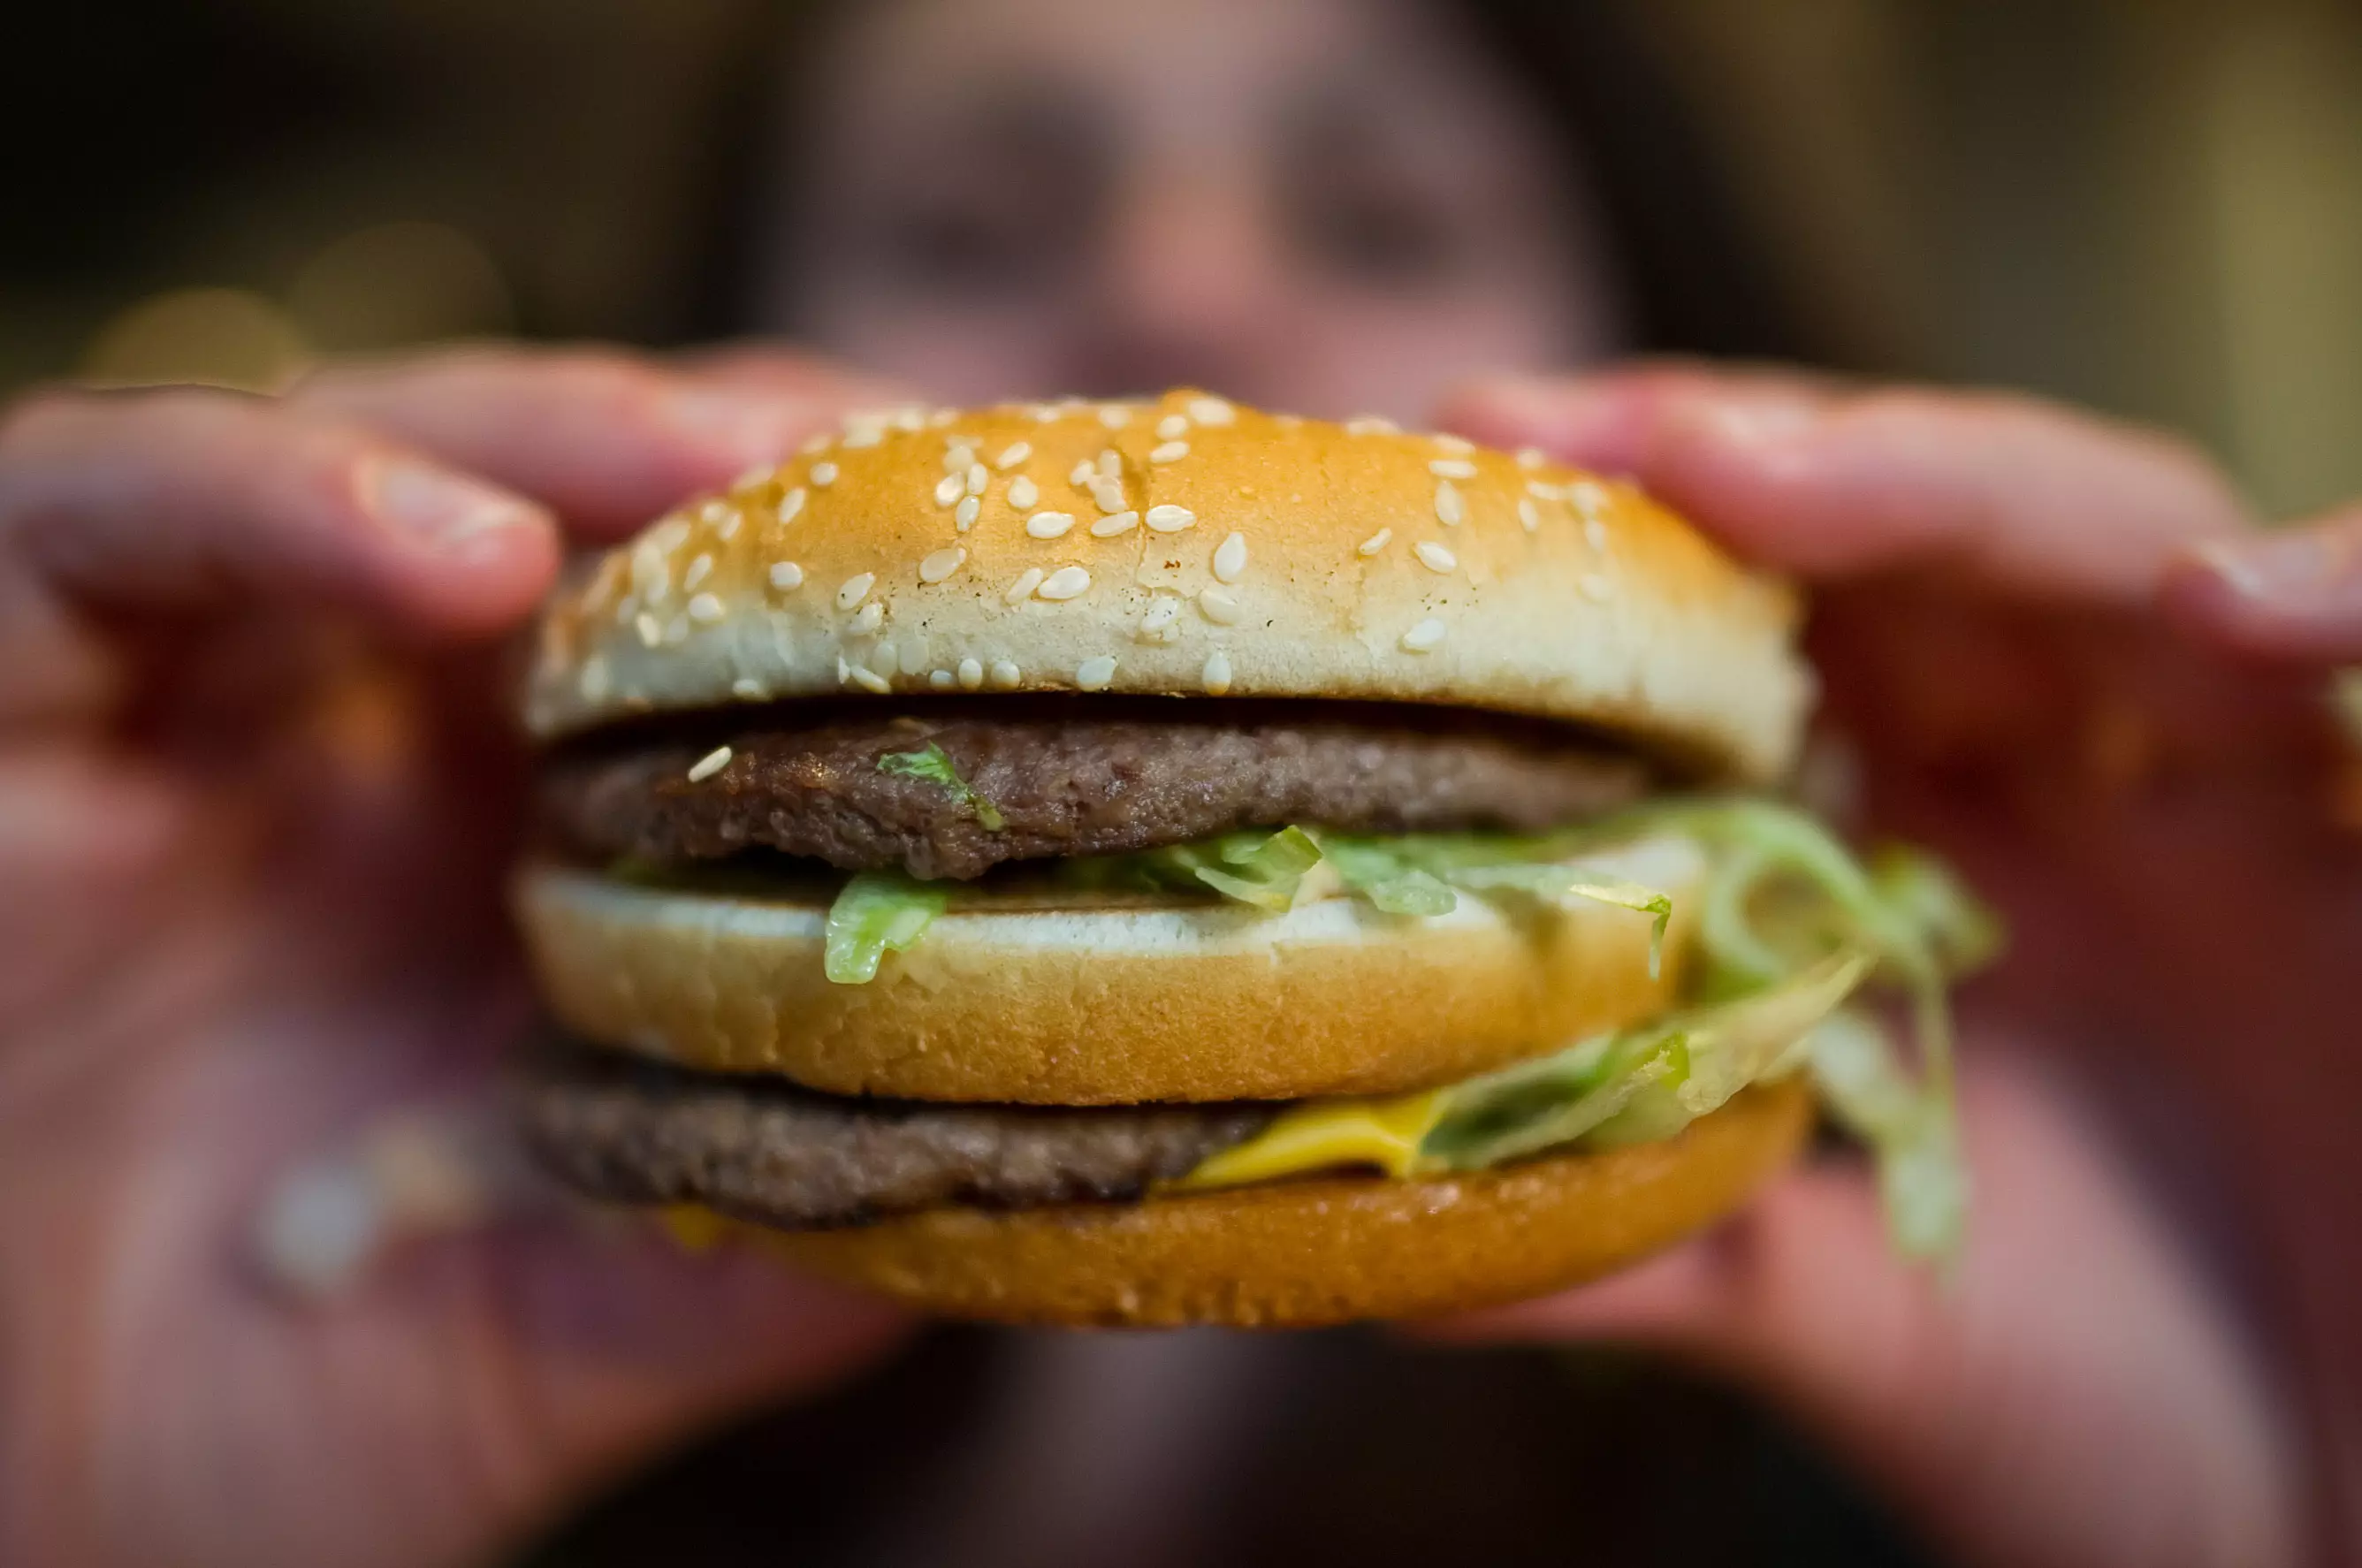 Chow down on a special Big Mac at McDonald's (